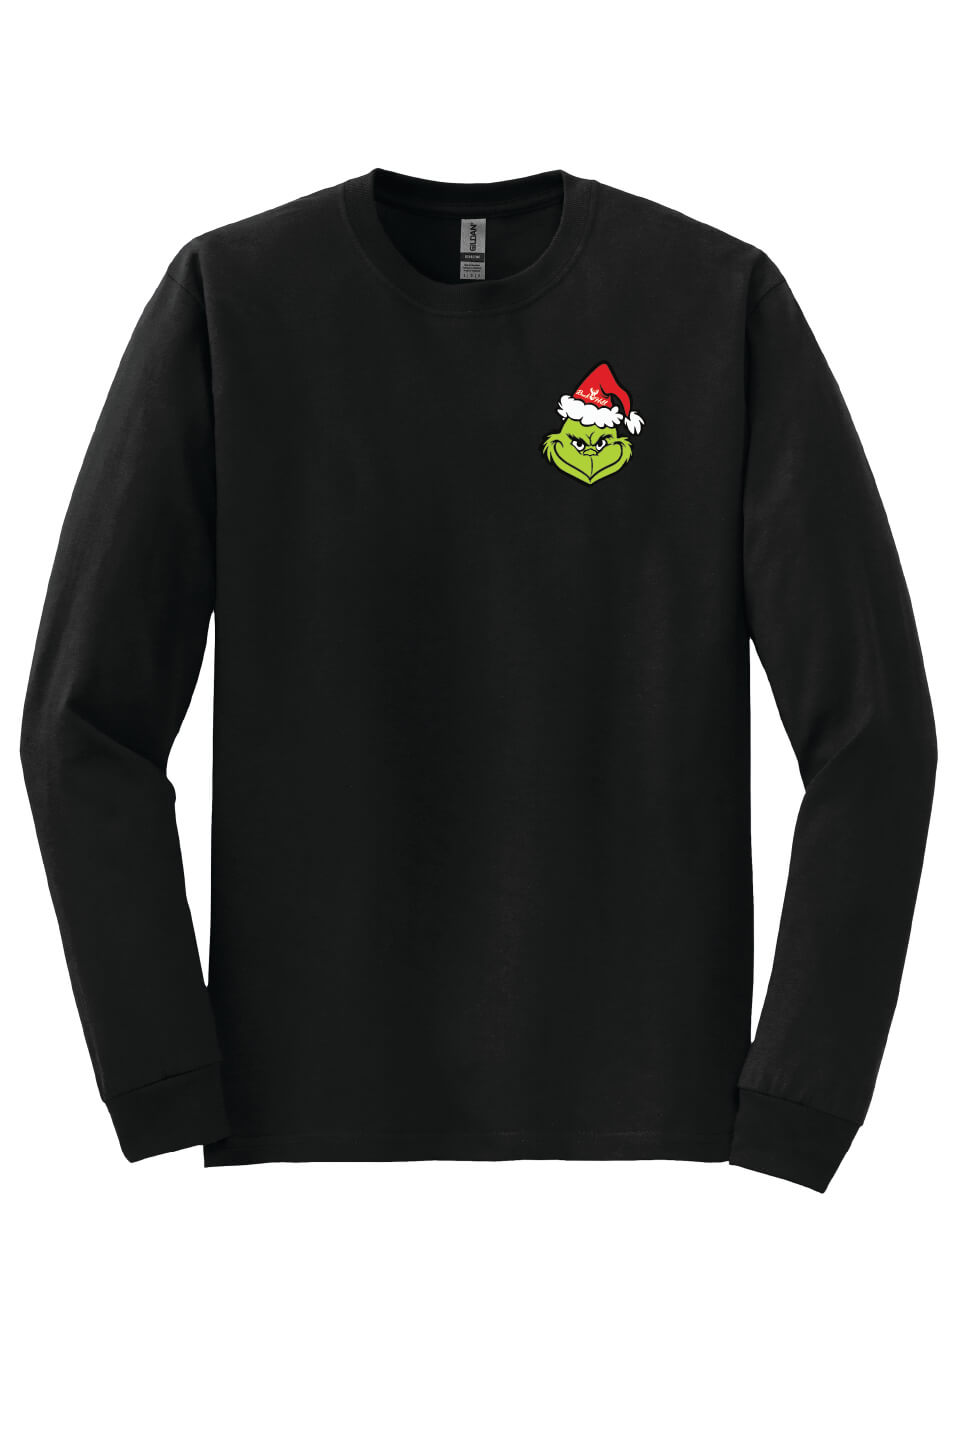 Grinch long sleeve shirt front